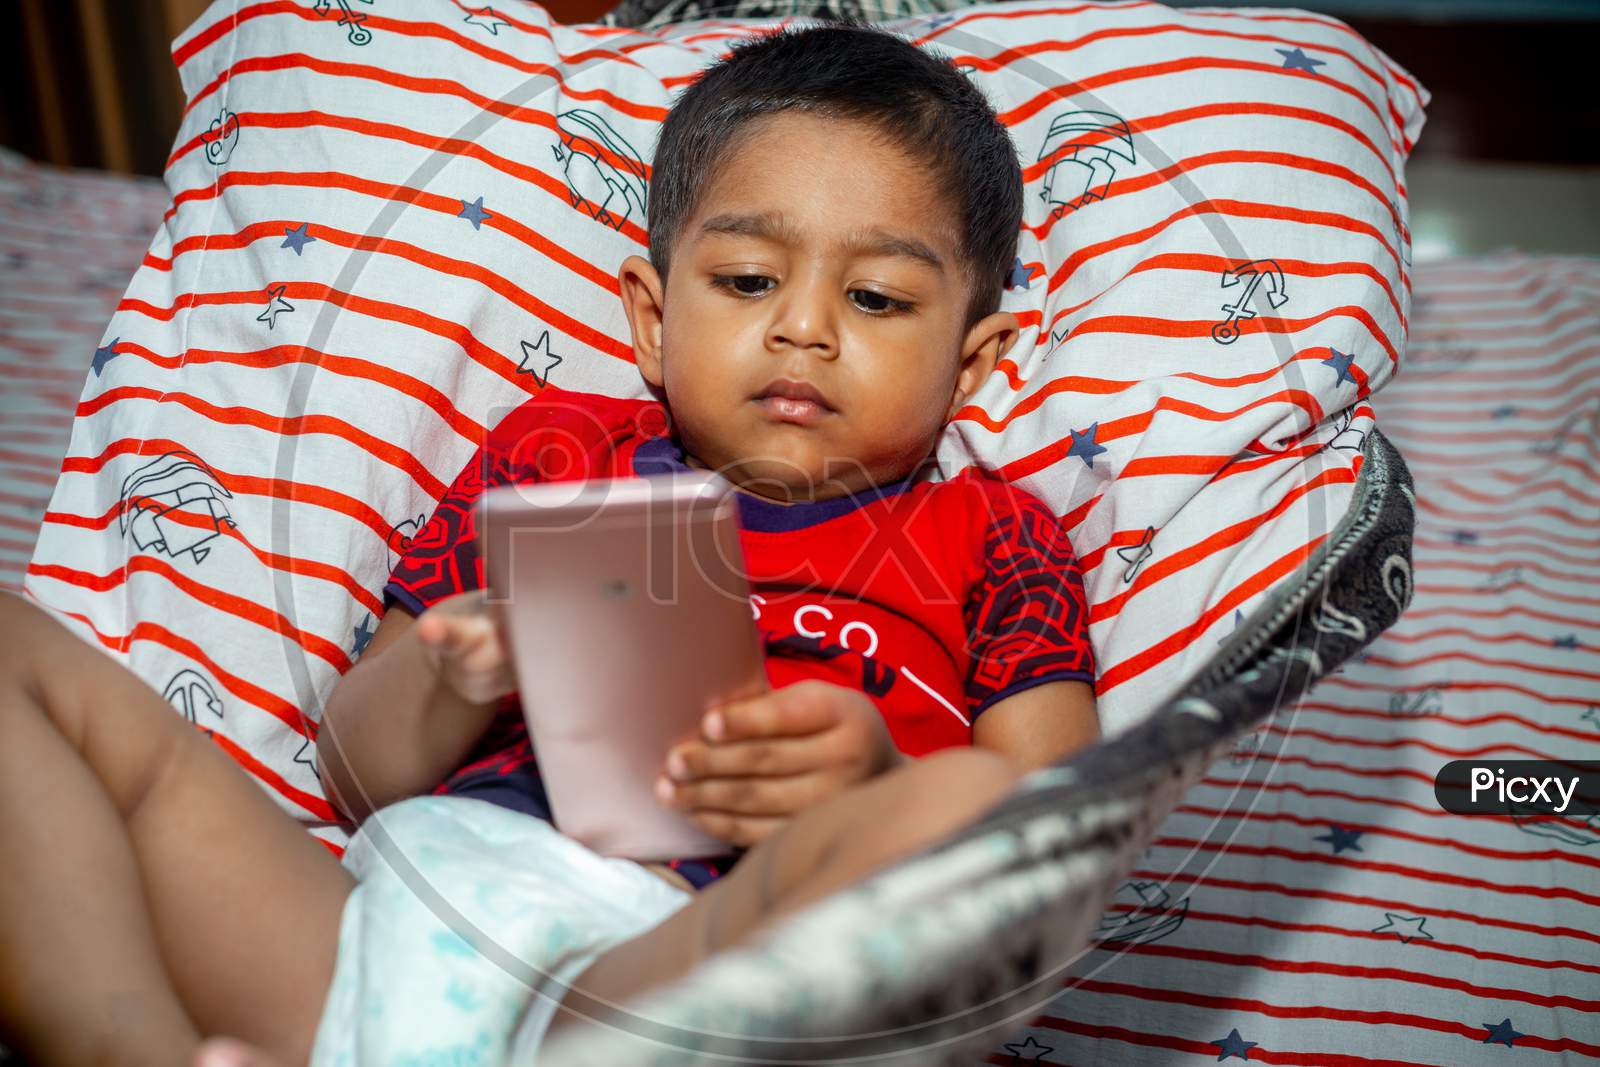 Before Going To Sleep A Child Is Lying A Homemade Hammock And Watching Cartoons Using A Smartphone. Kids Playing With Smartphone. Mobile Phone And Internet Addiction Concept.